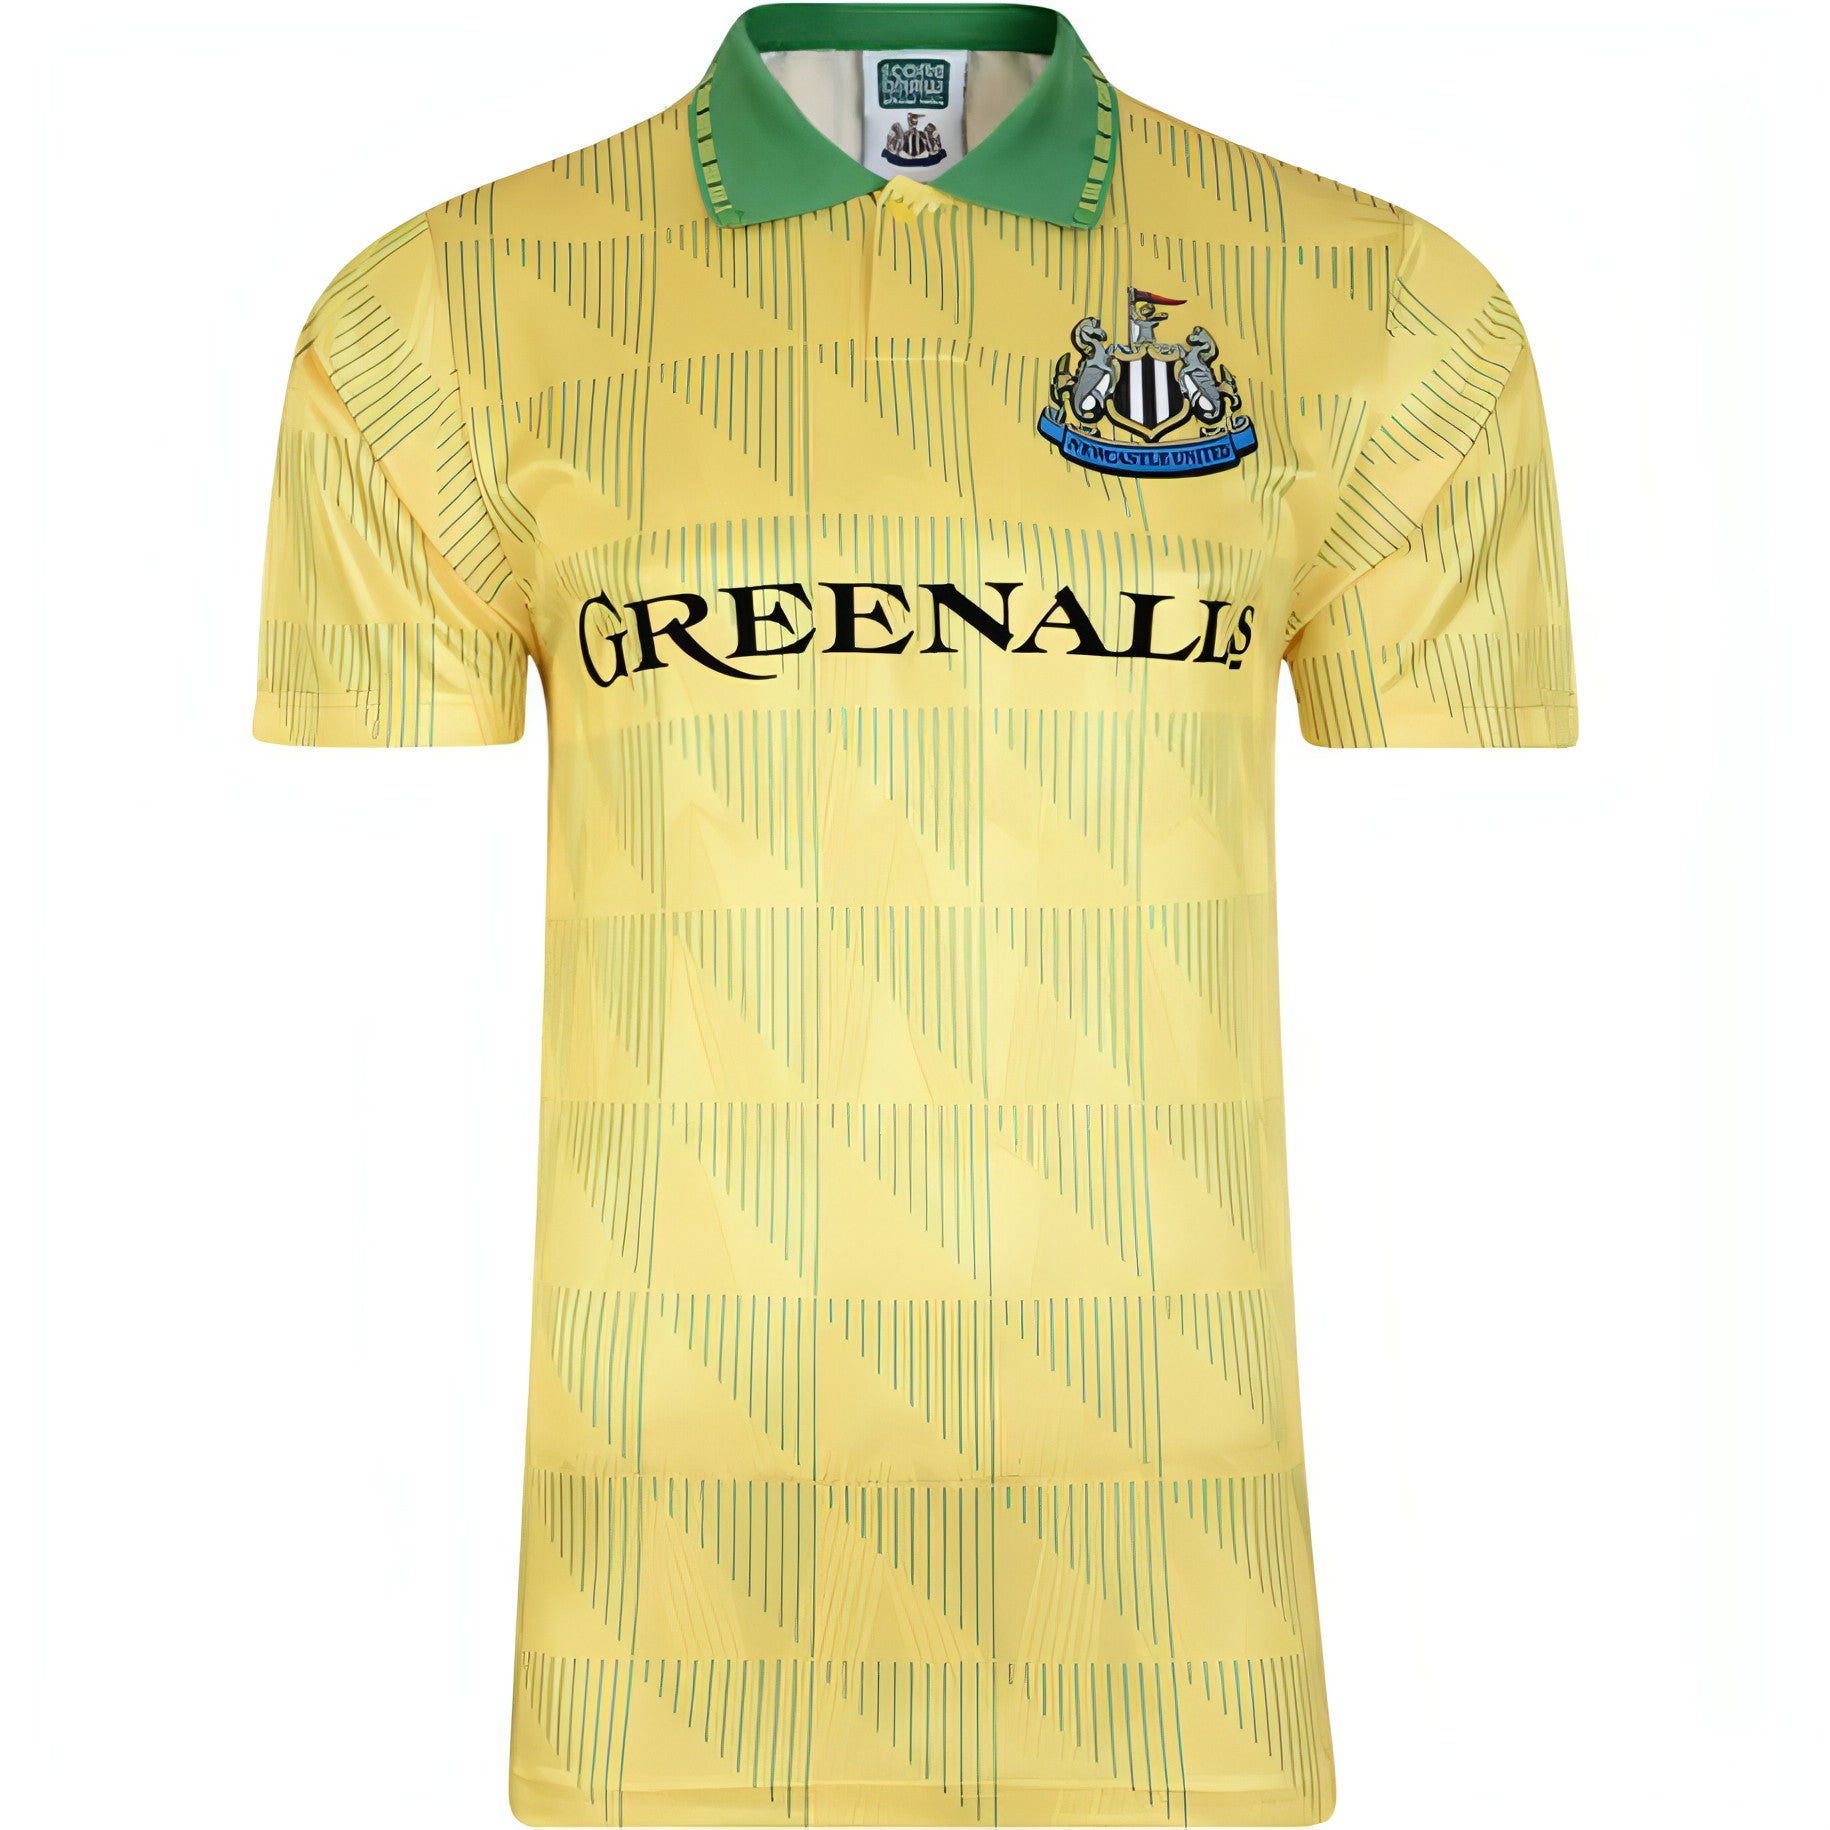 Score Draw Retro Newcastle United Away Shirt Newc90Apyss Front - Front View